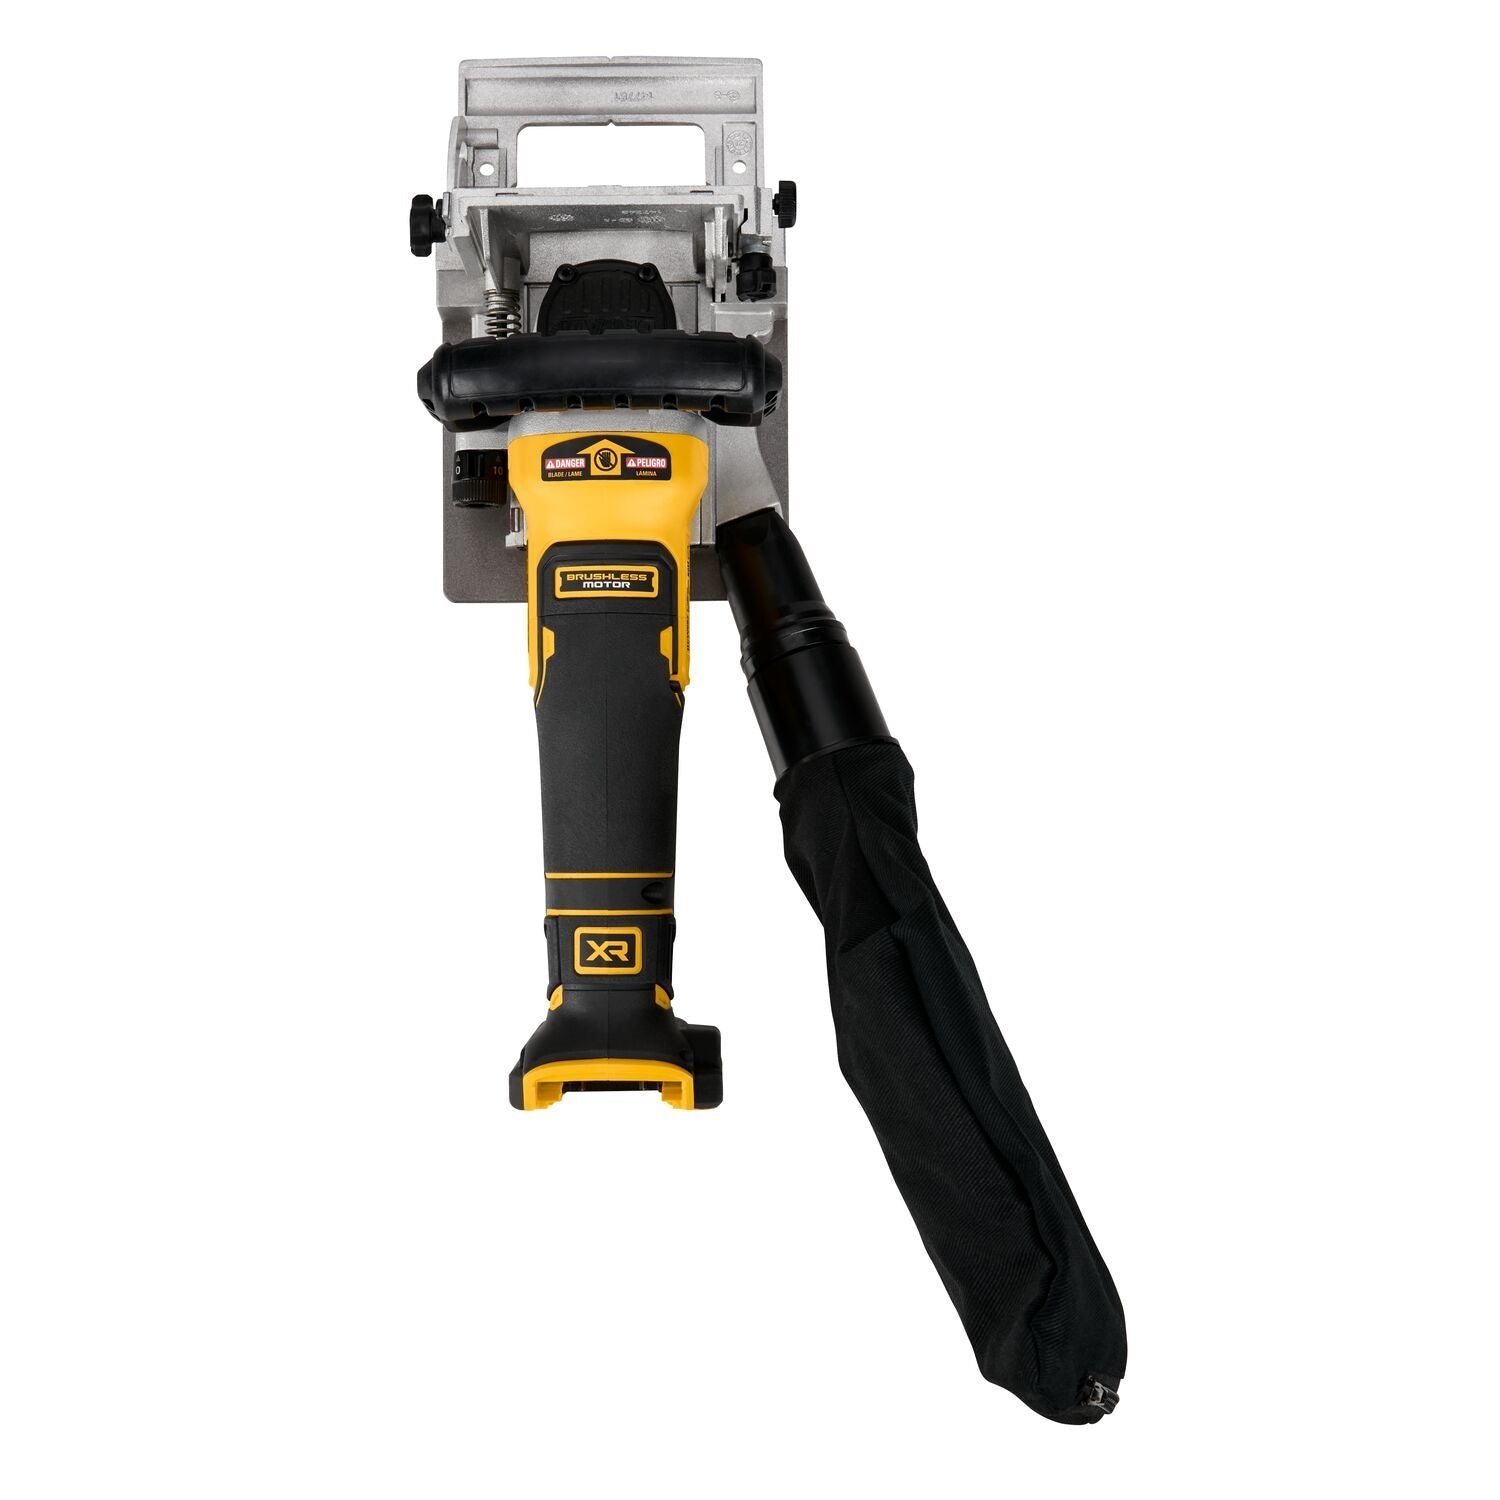 Dewalt DCW682B 20V MAX* XR® BRUSHLESS CORDLESS BISCUIT JOINER (Tool Only)